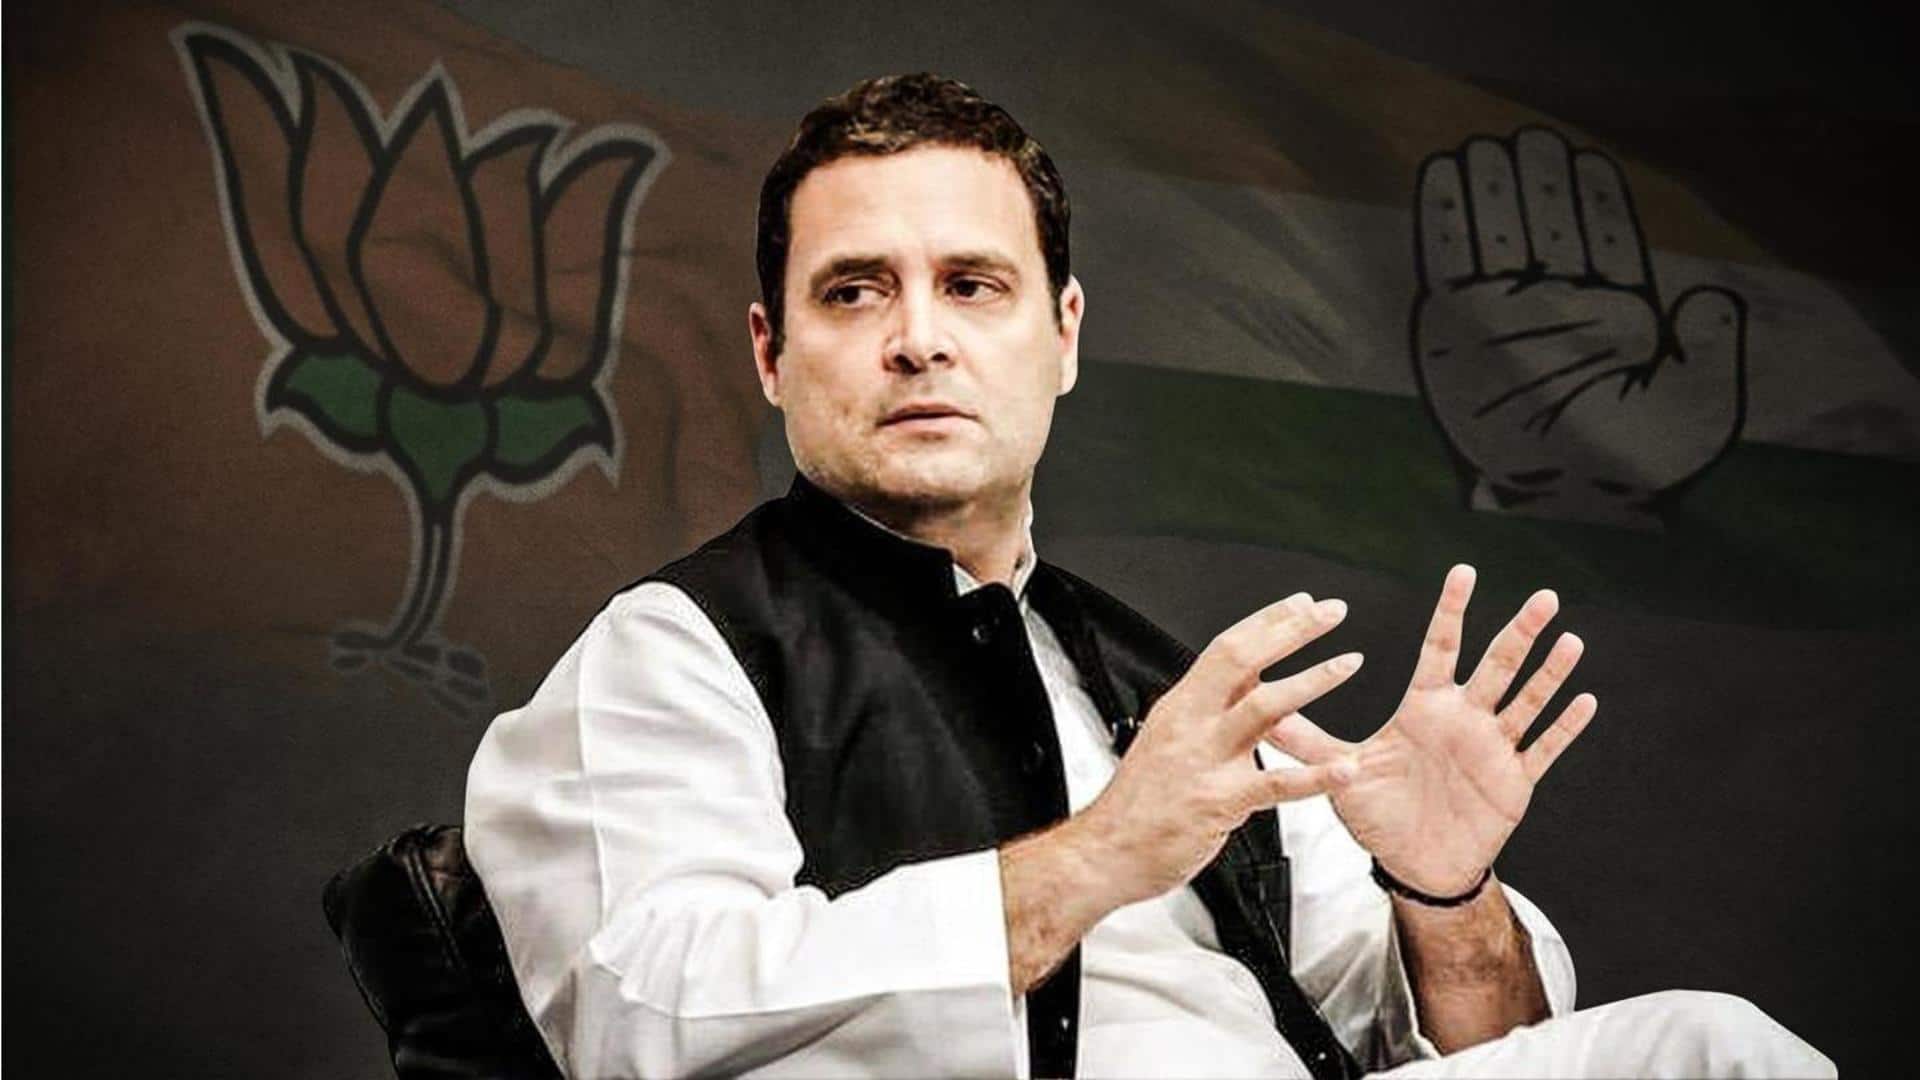 'Will abide': Rahul Gandhi responds to government-allotted bungalow eviction notice